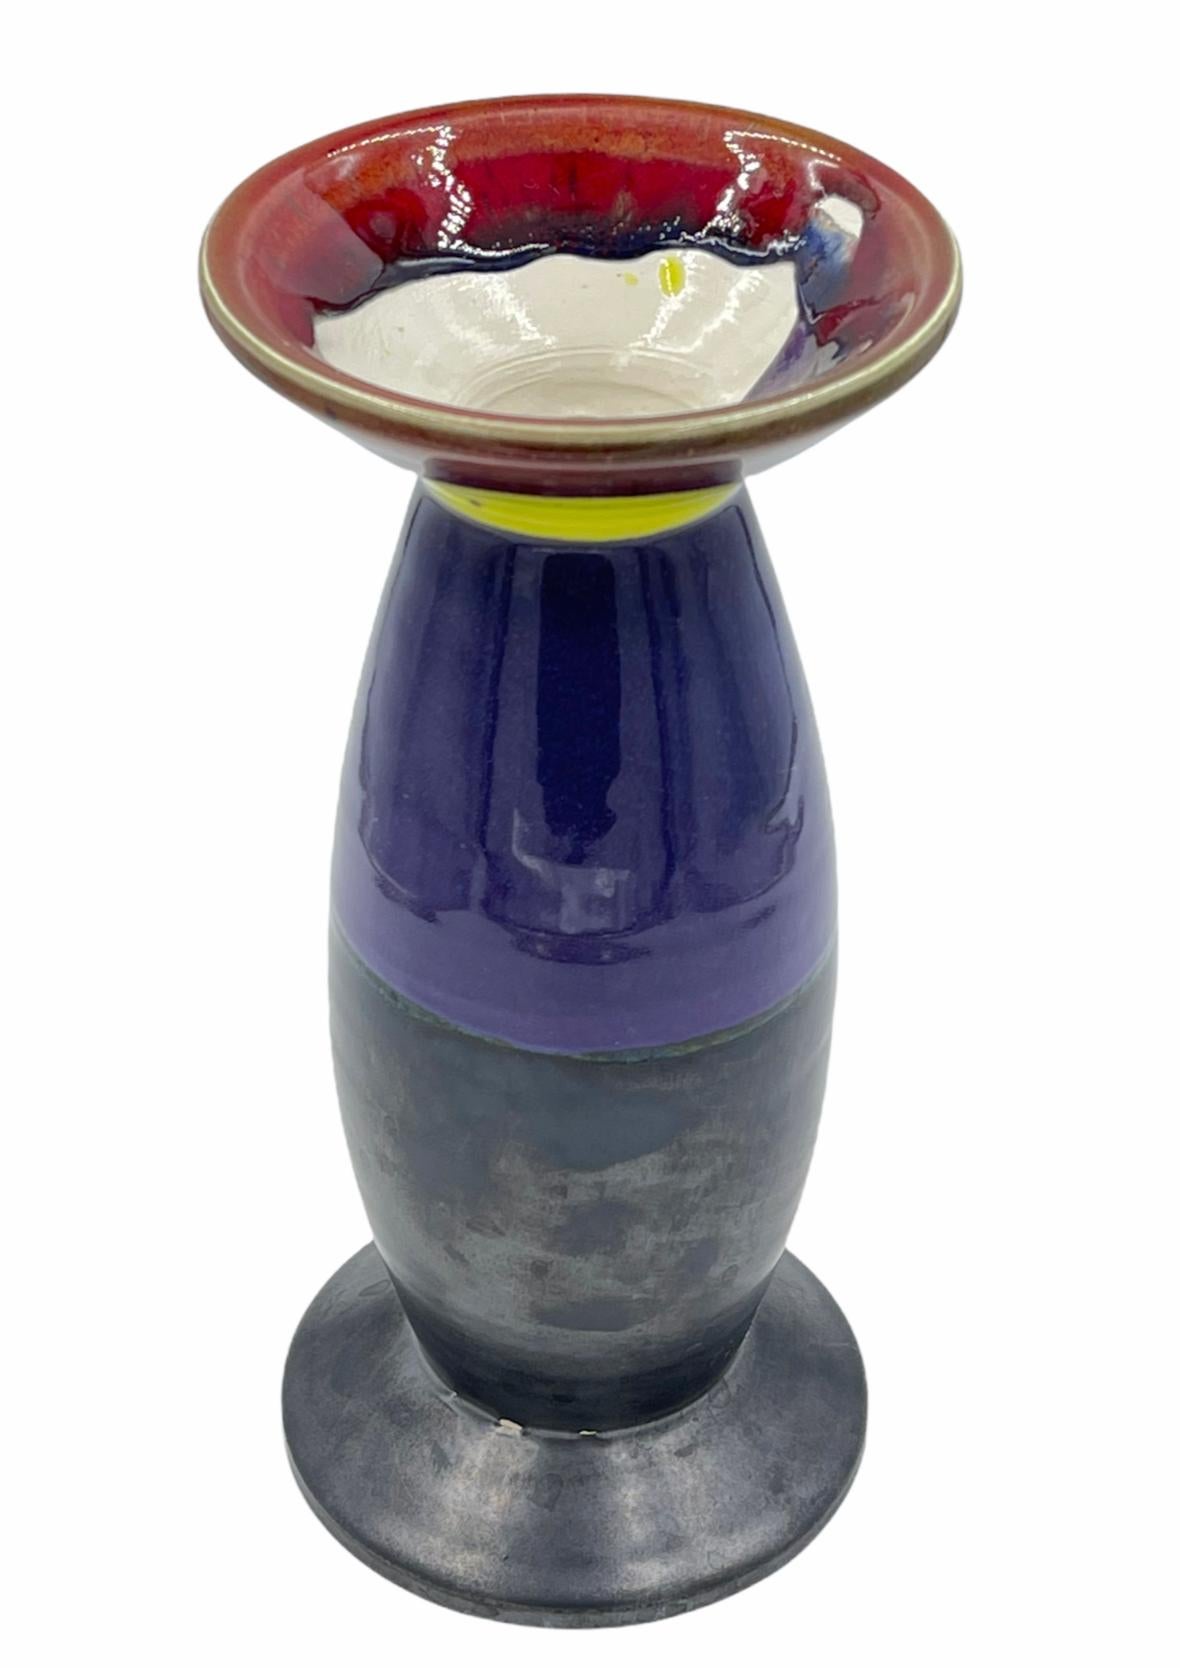 Tall expo vase 2000 in colors of purple yellow brown and gun metal black. Peter Shire, a founding member of Sottsass' Memphis Milano Group is an LA-based artist whose work eludes all attempts at categorization. He has created ceramics, furniture,